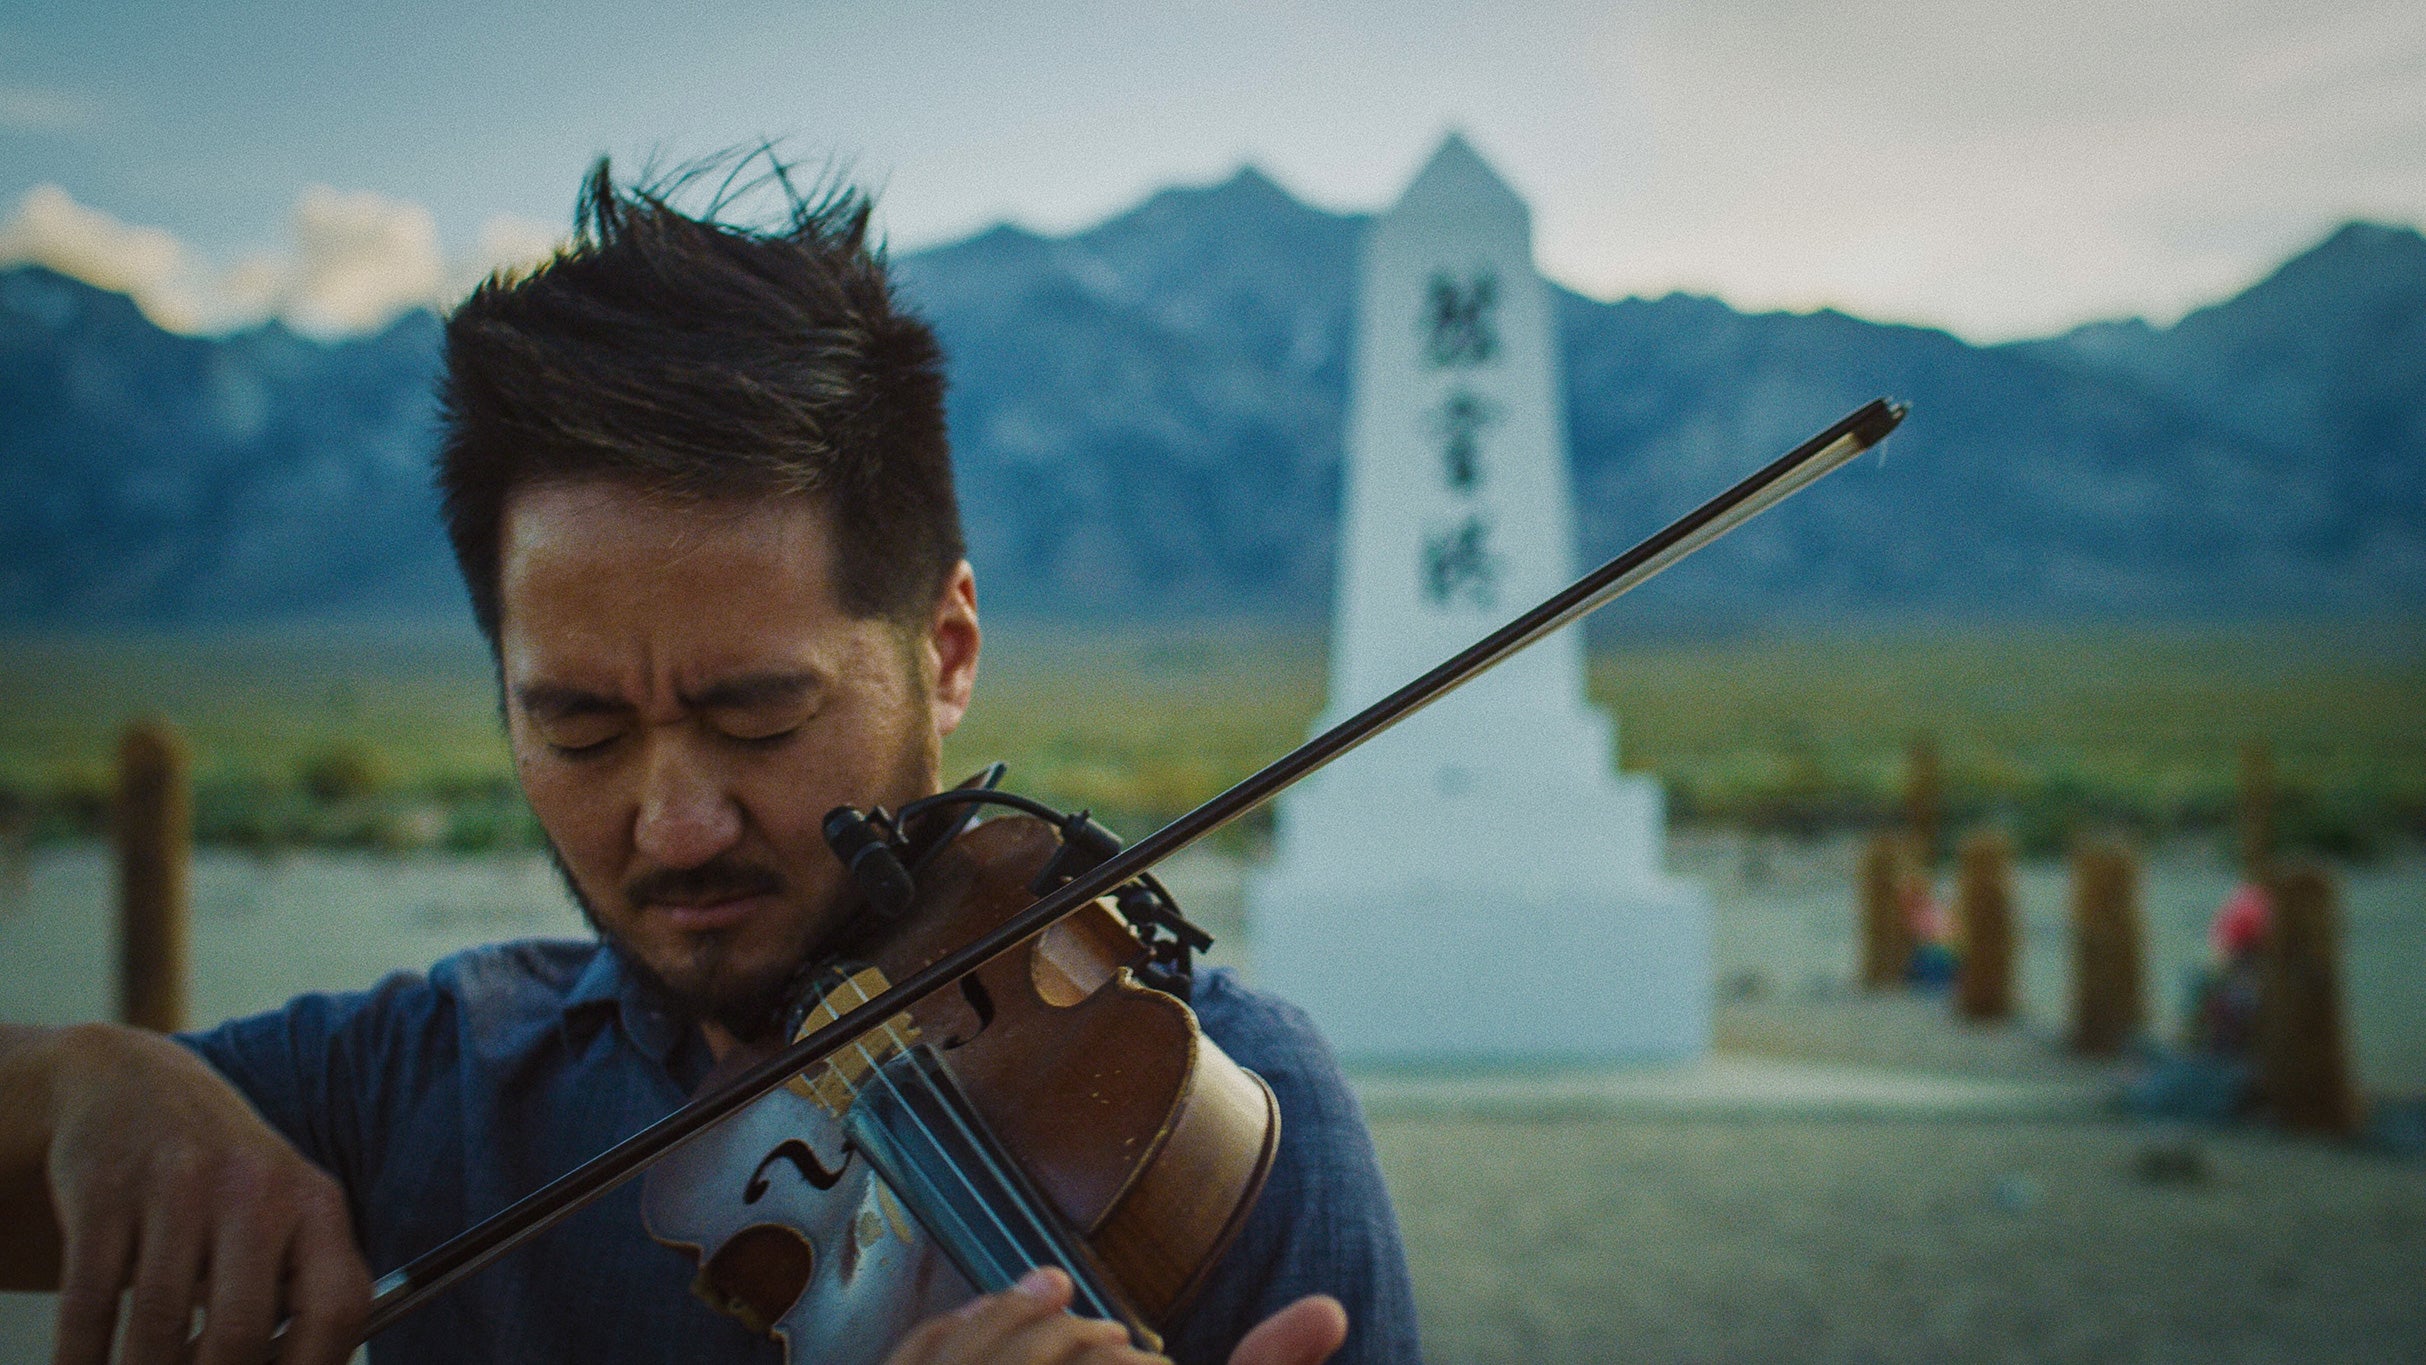 working presale password for Kishi Bashi presale tickets in Los Angeles